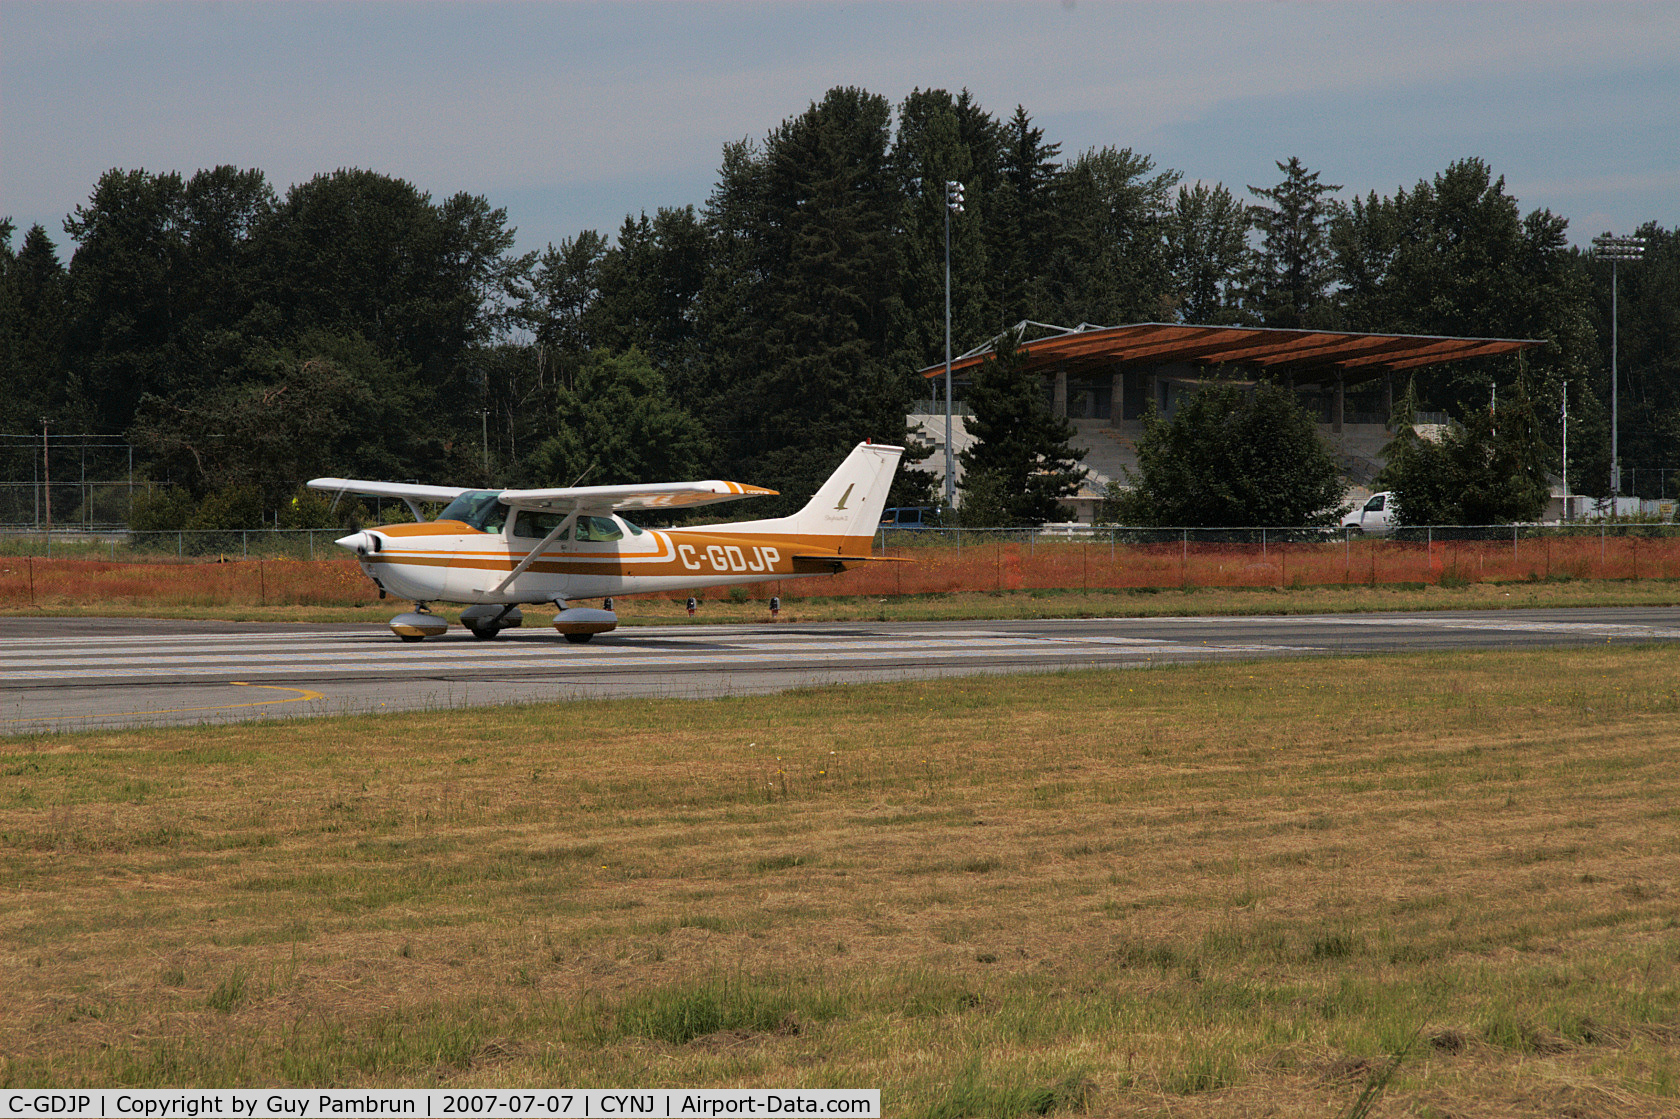 C-GDJP, 1974 Cessna 172M C/N 17262063, Lining up for take off